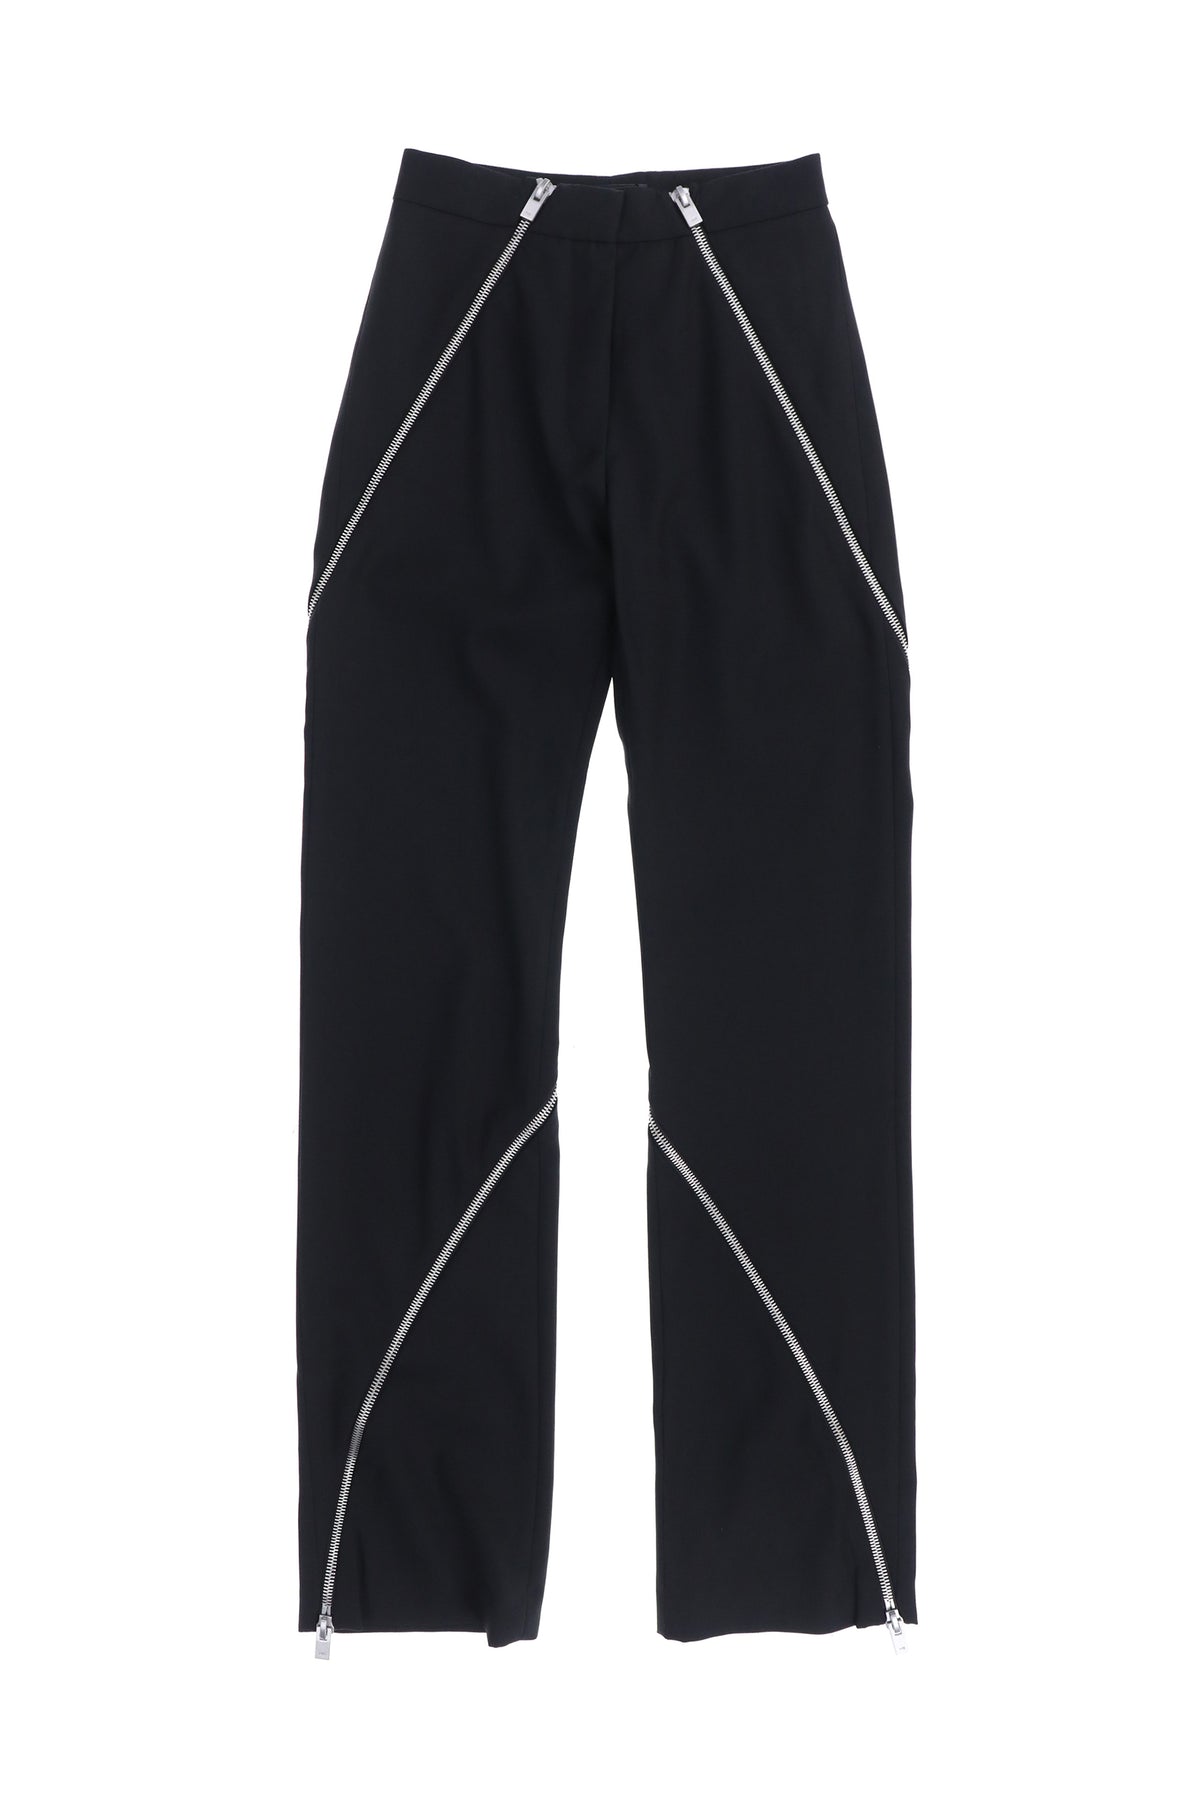 SLING TAILORED TROUSERS / BLK